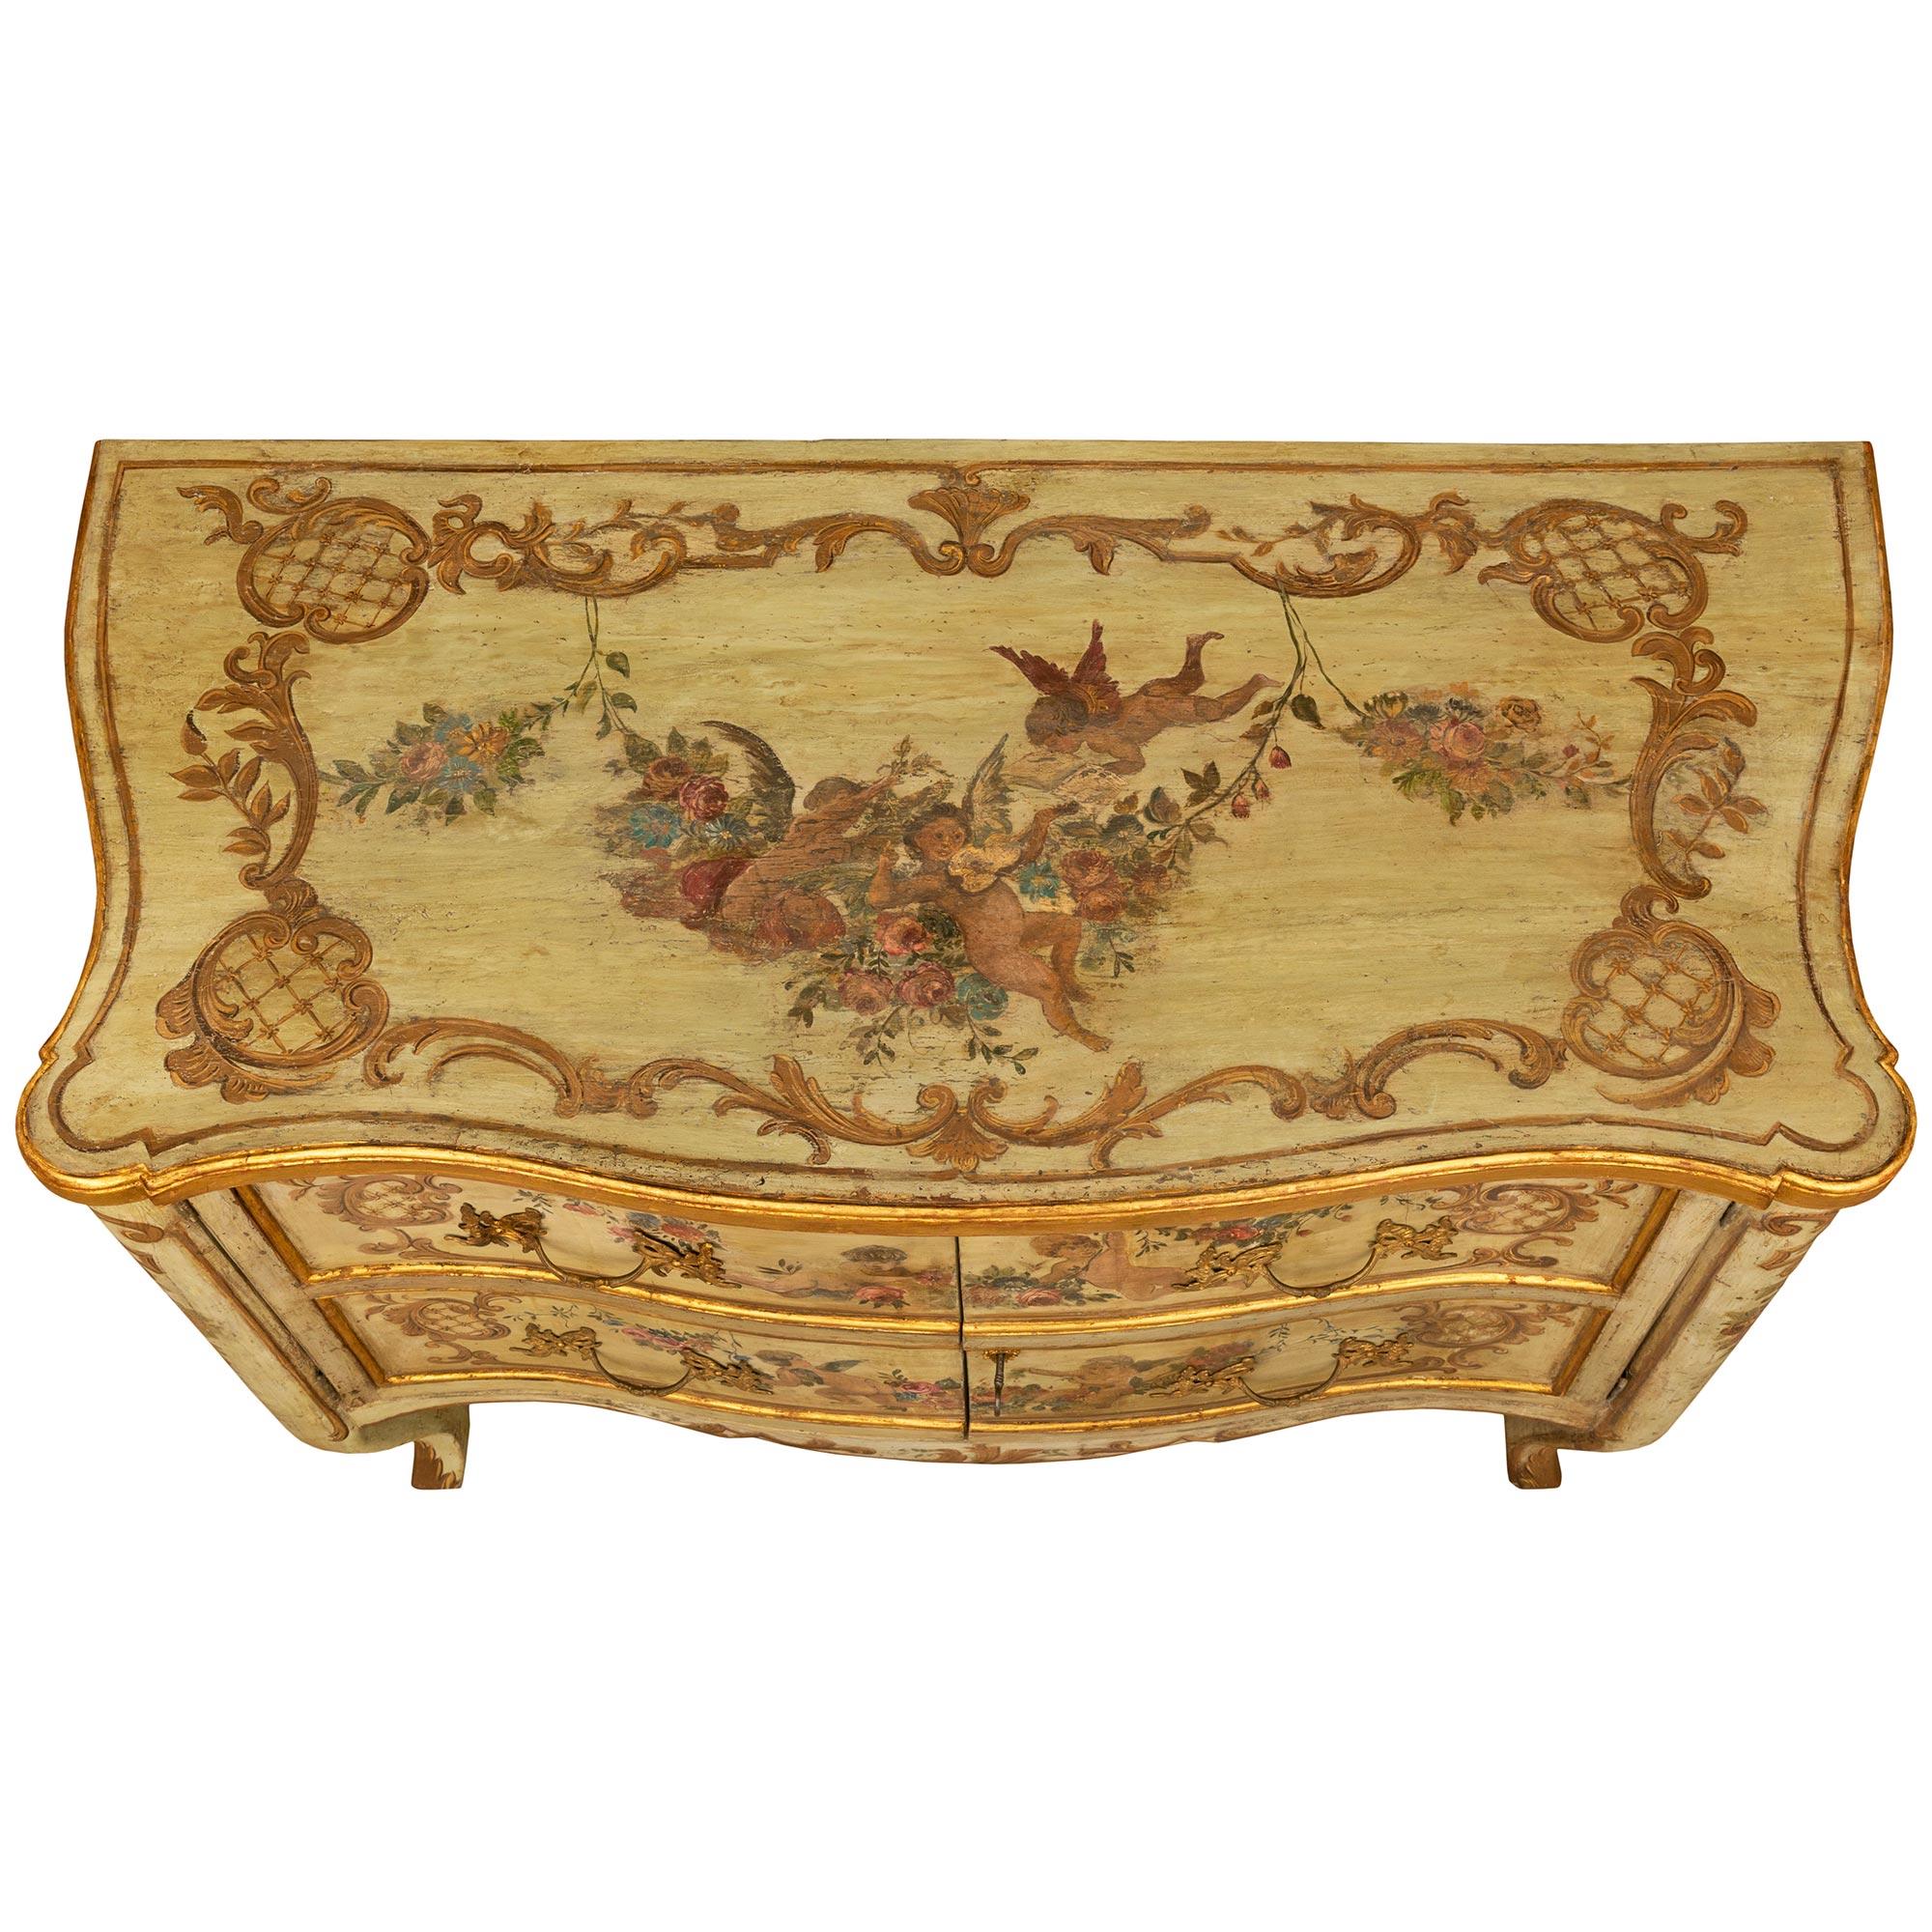 Italian 18th century Louis XV period Giltwood, Ormolu and patinated wood chest For Sale 9